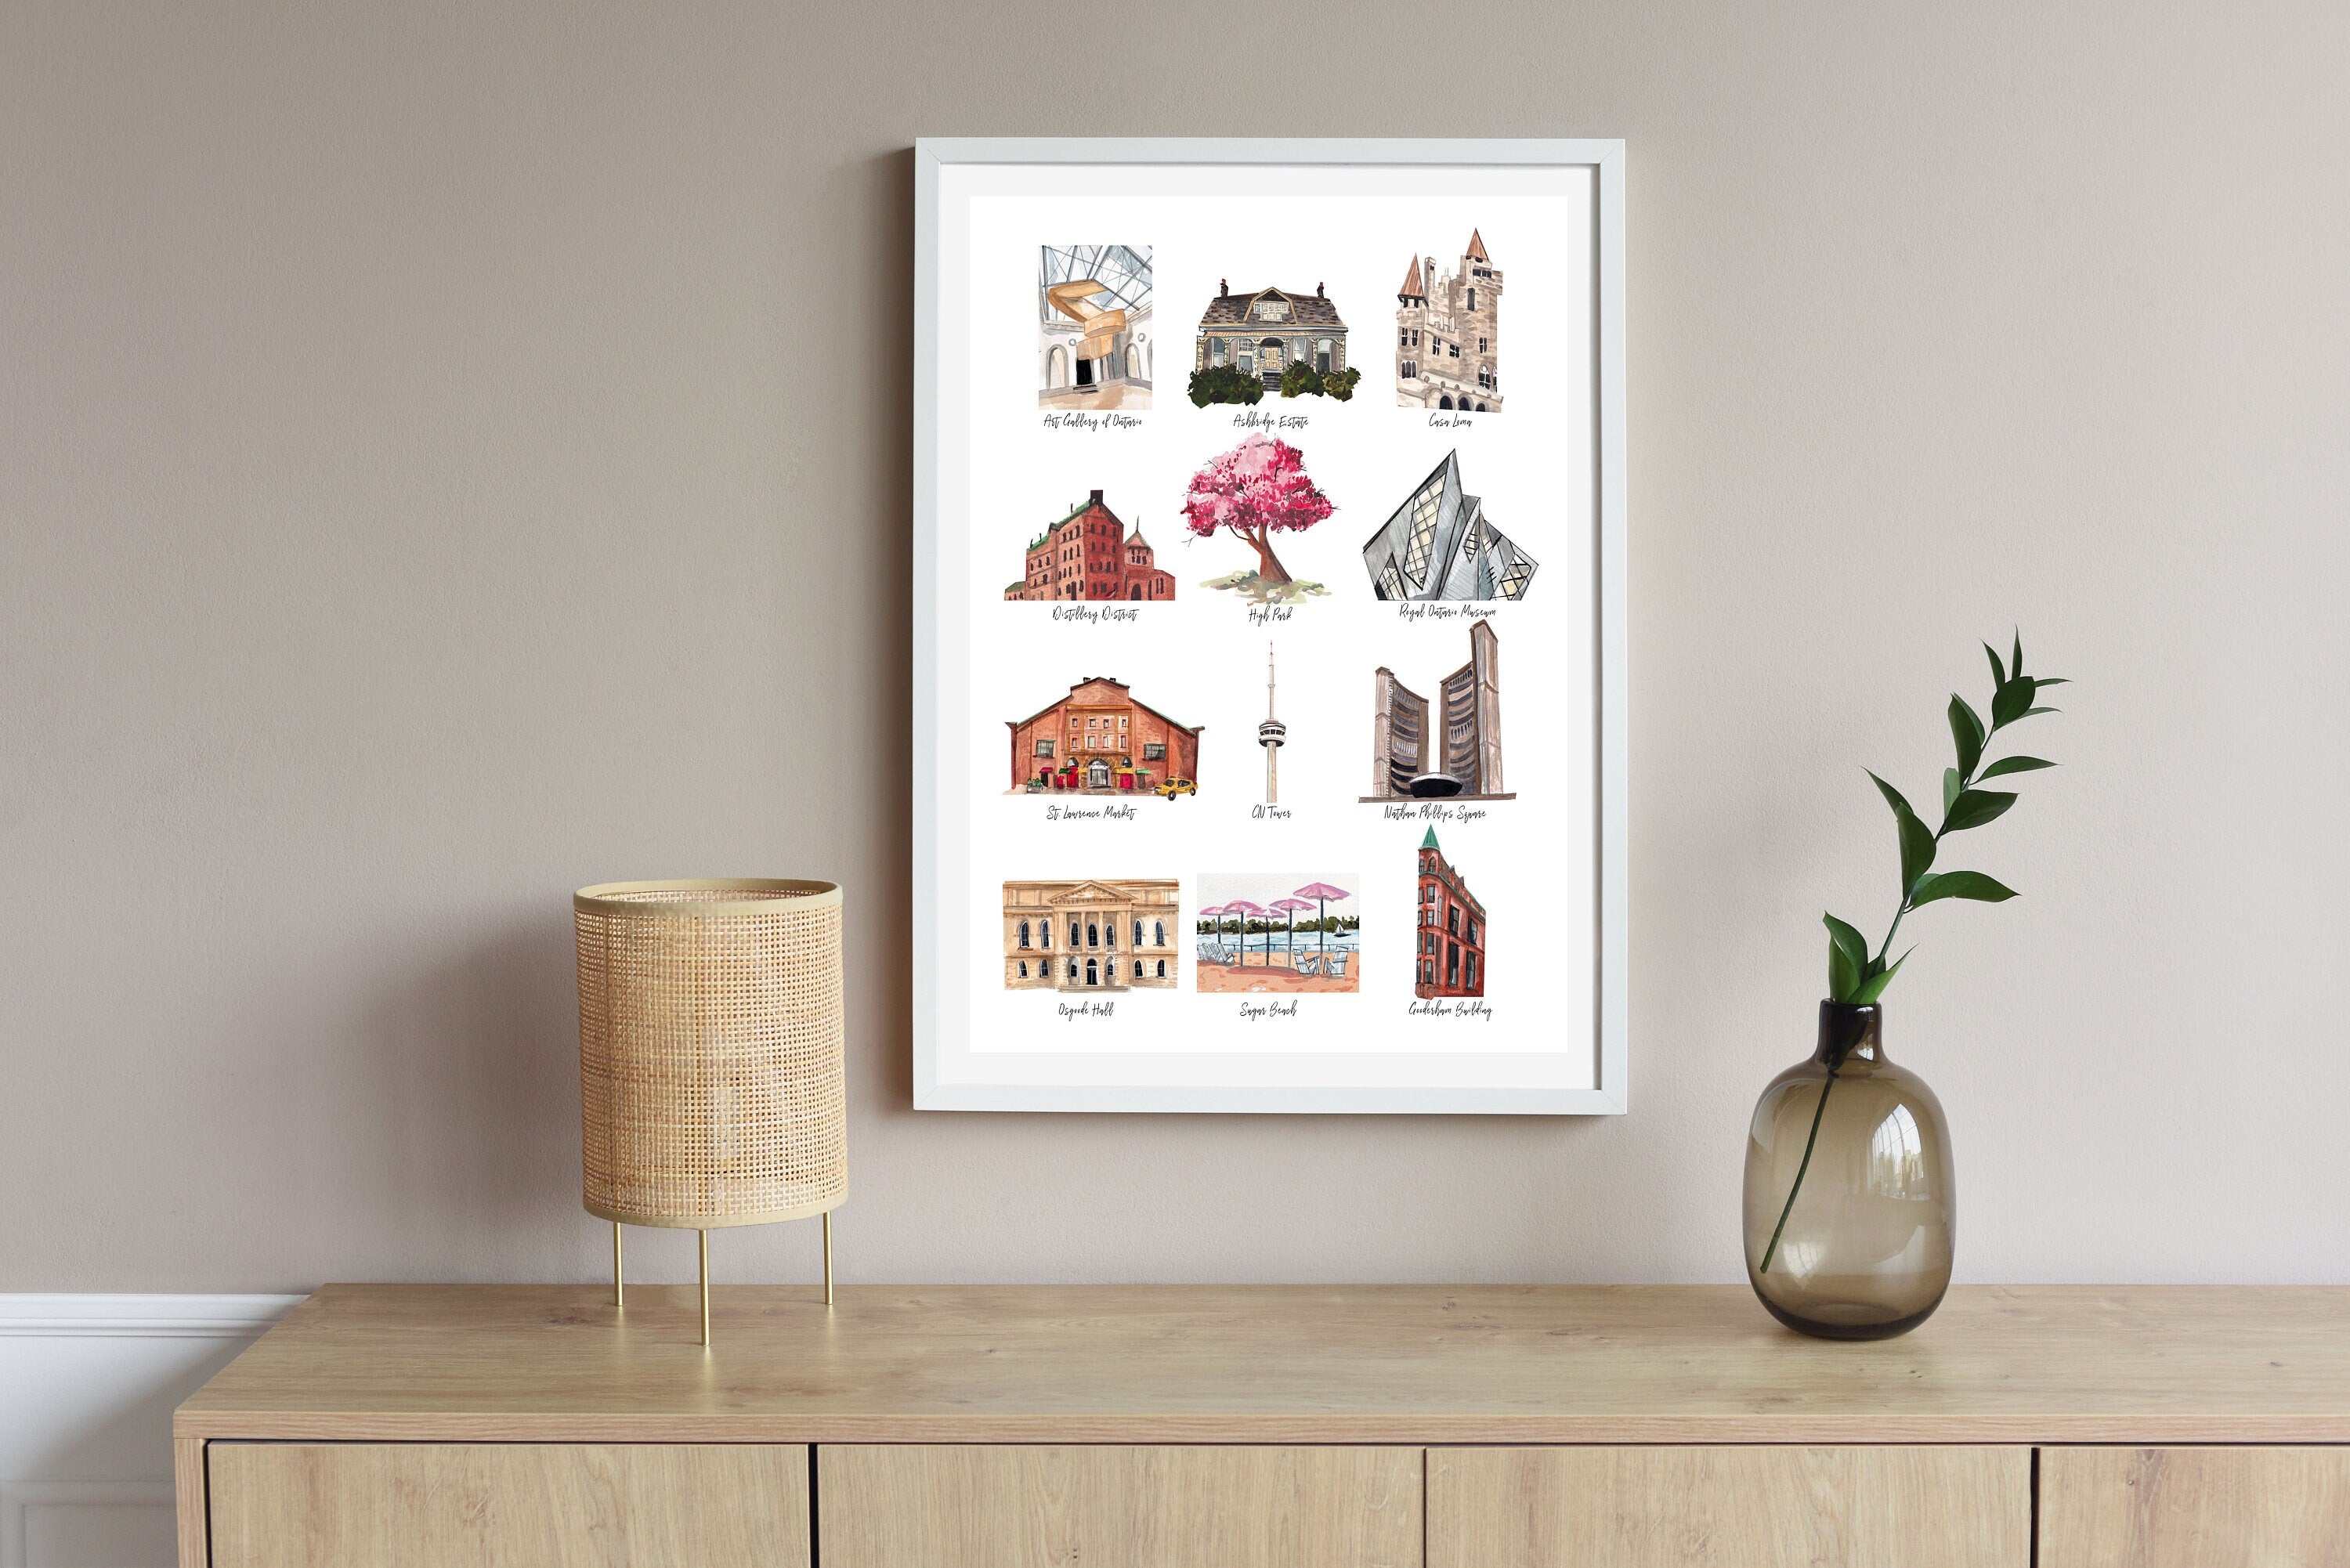 Toronto landmarks print of painting by Medjool Studio. Print of an original gouache painting of 12 notable landmarks in Toronto, Canada, including the Art Gallery of Ontario, High Park, the Distillery District, Casa Loma, the Royal Ontario Museum, St. Lawrence Market, the CN Tower, and more!